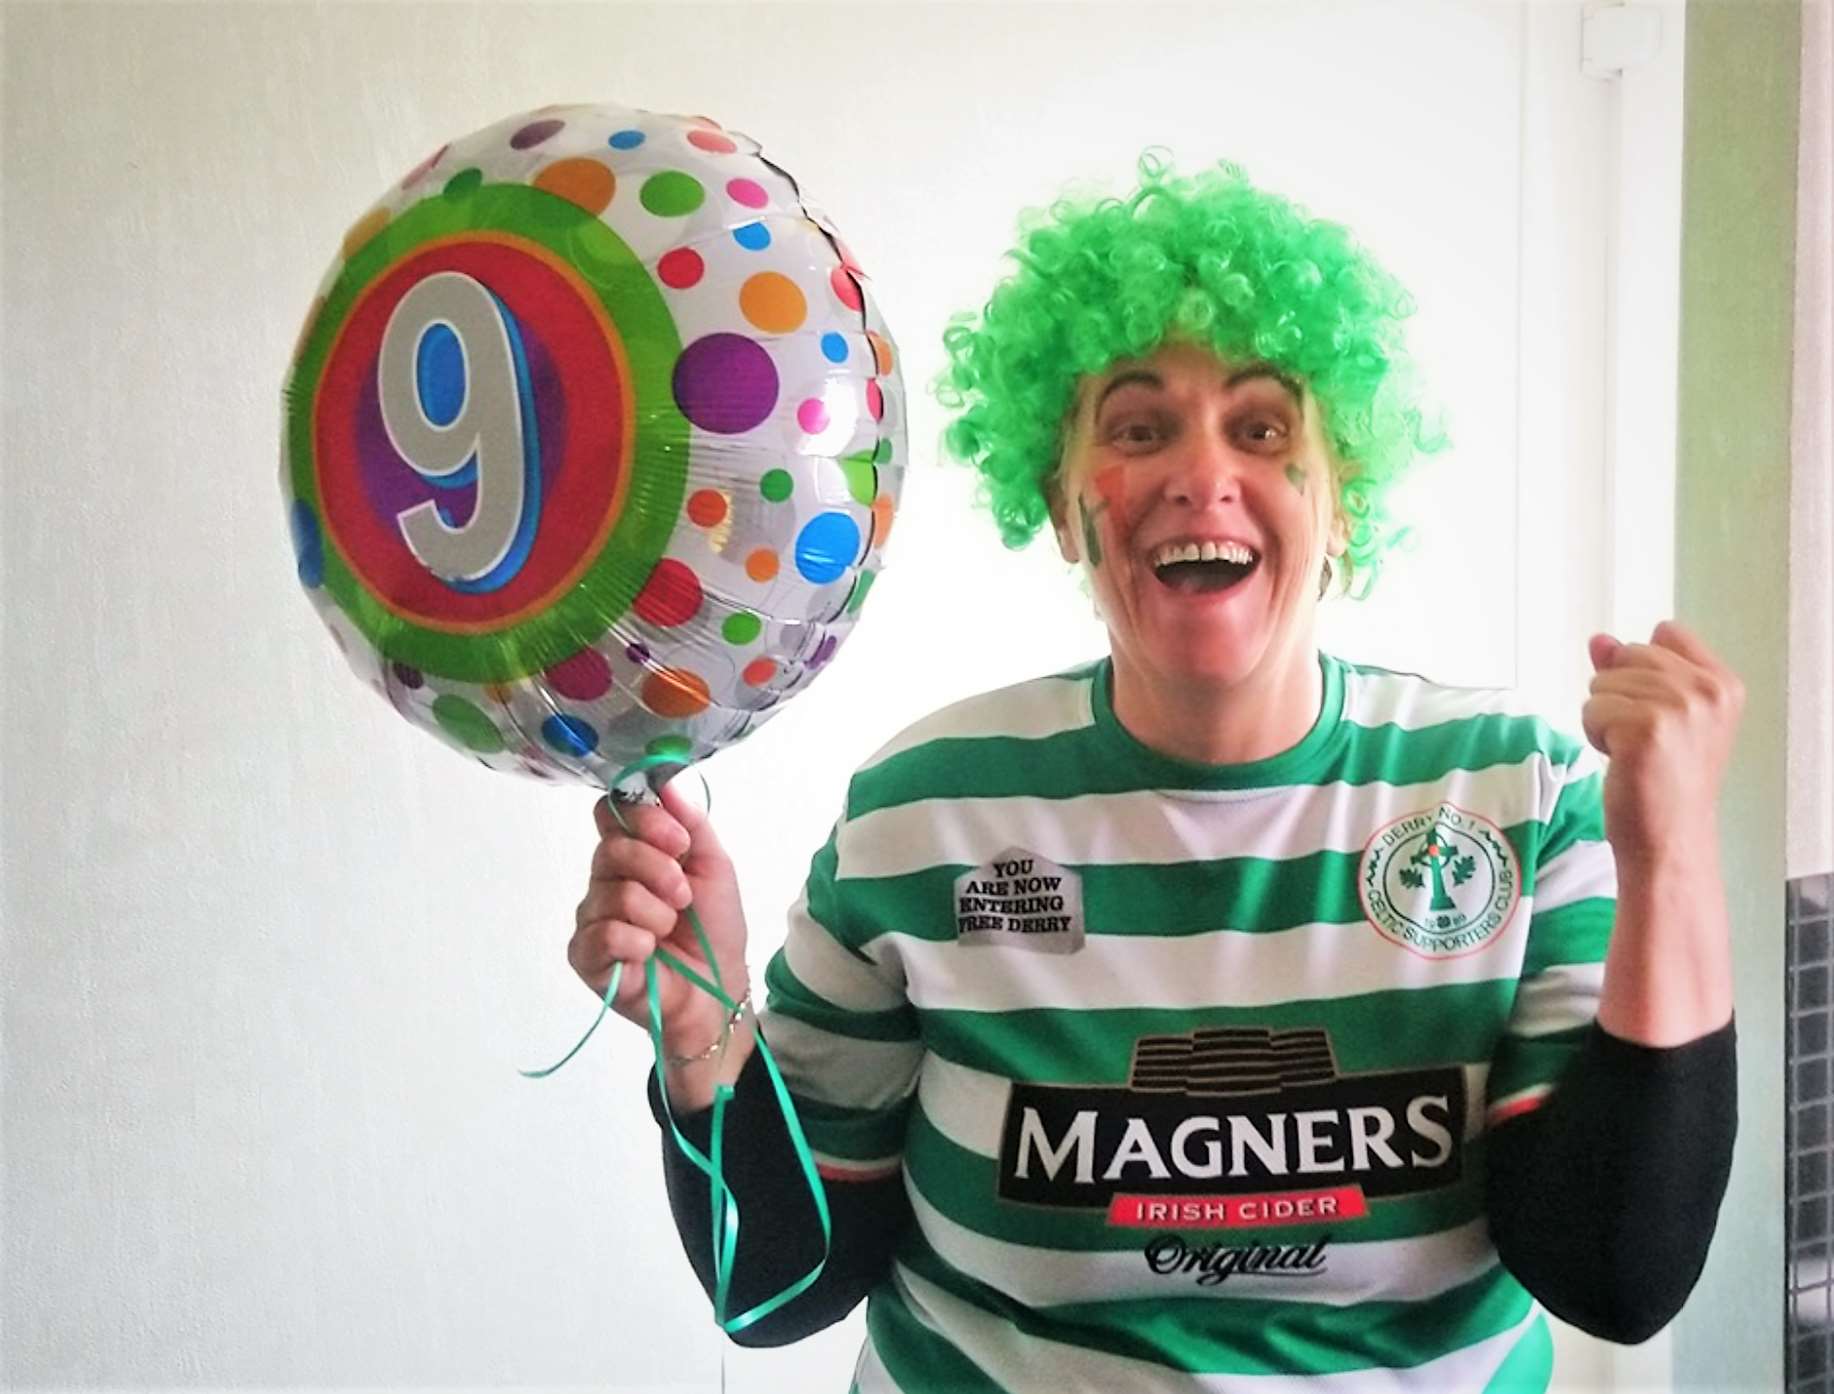 Fiona is Celtic daft and celebrated the team's nine-in-a-row achievement after they were crowned Scottish Premiership champions again.